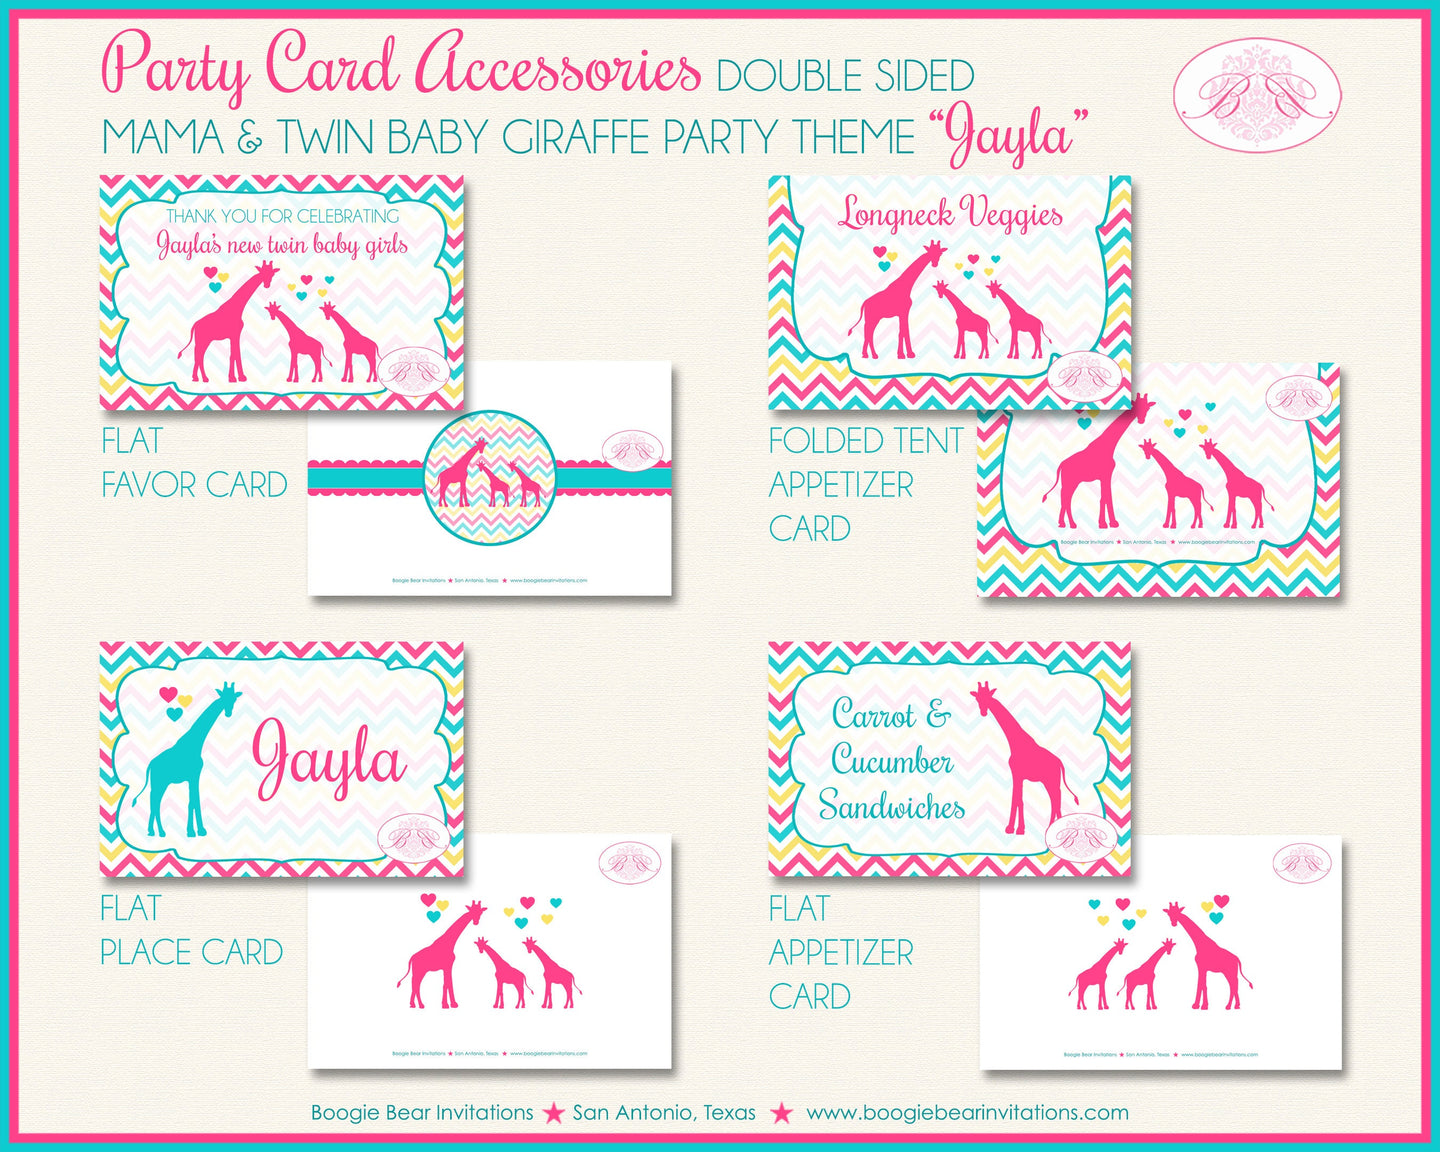 Twin Giraffe Baby Shower Favor Card Tent Place Appetizer Food Sign Label Tag Girl Pink Aqua Zoo Boogie Bear Invitations Jayla Theme Printed